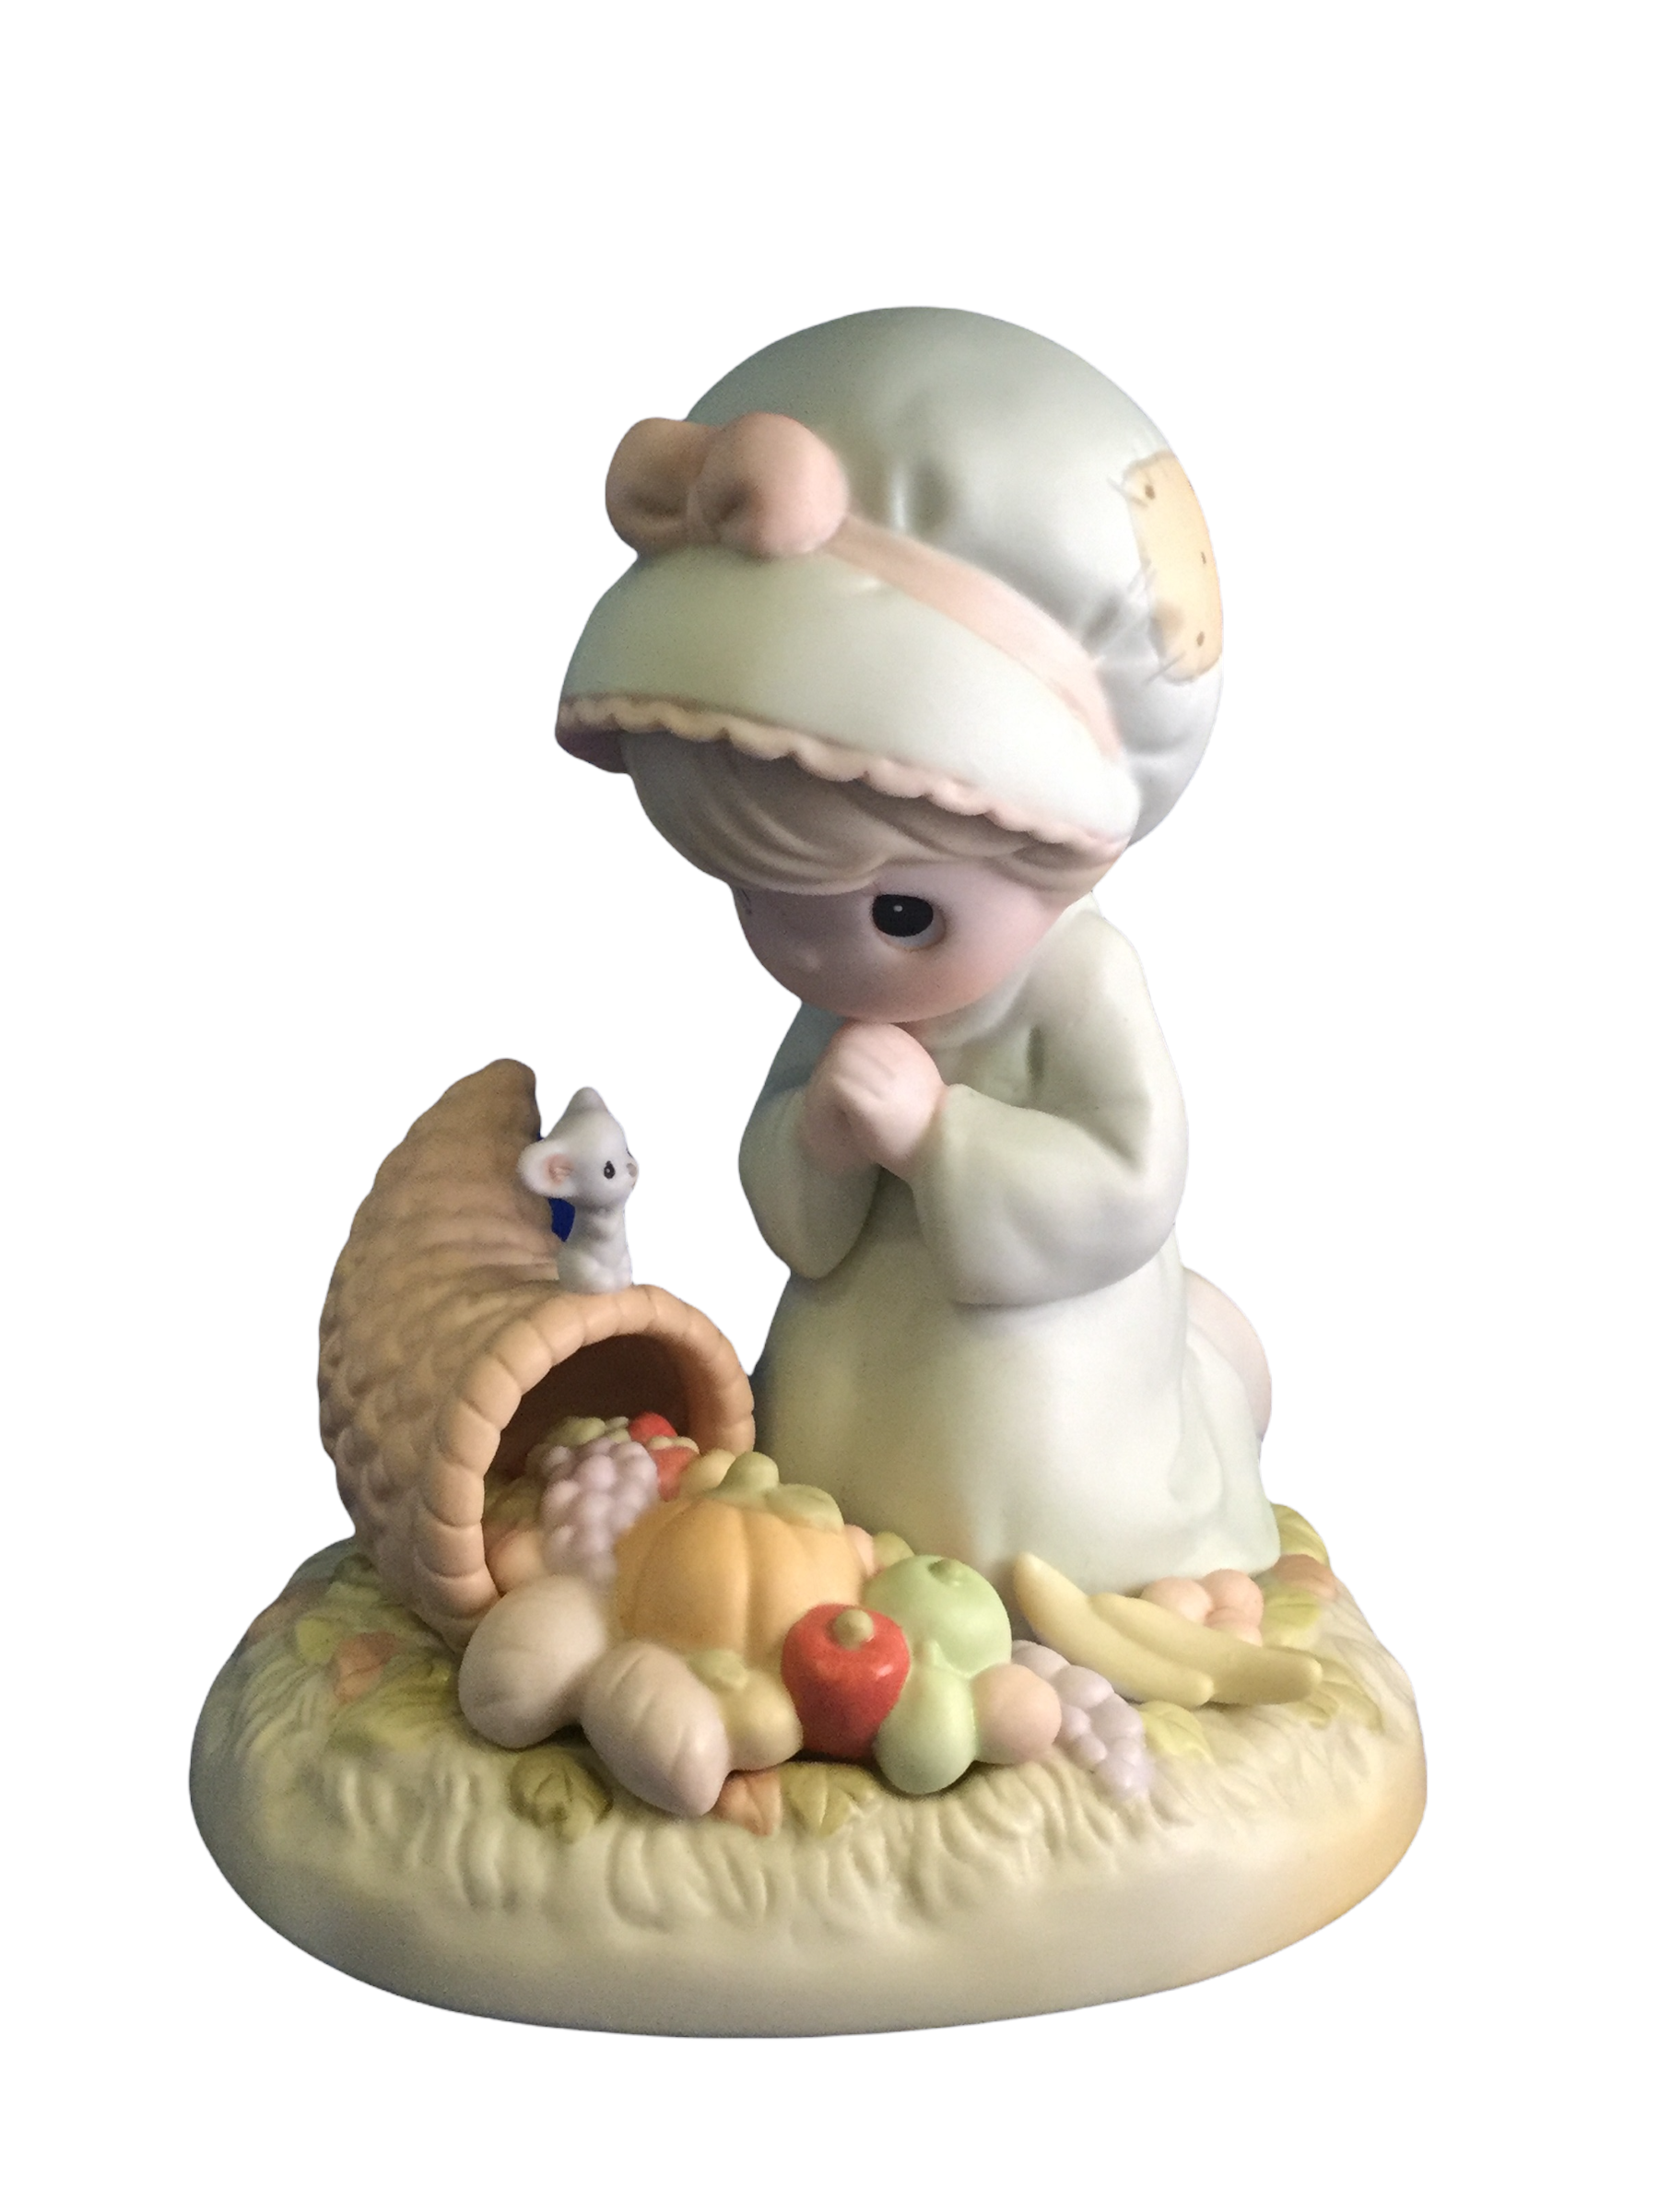 Praise God From Whom All Blessings Flow - Precious Moment Figurine